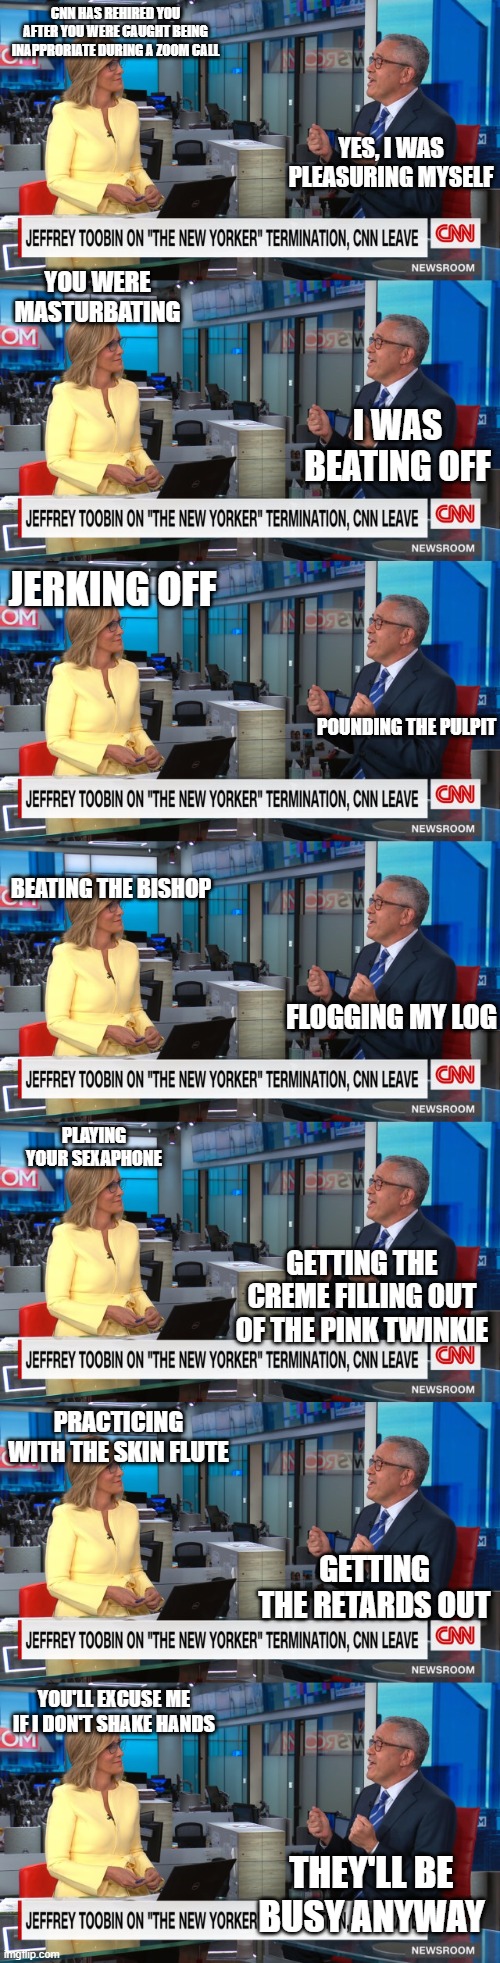 Jeffrey 'tubin' Toobin on cnn | CNN HAS REHIRED YOU AFTER YOU WERE CAUGHT BEING INAPPRORIATE DURING A ZOOM CALL; YES, I WAS PLEASURING MYSELF; YOU WERE MASTURBATING; I WAS BEATING OFF; JERKING OFF; POUNDING THE PULPIT; BEATING THE BISHOP; FLOGGING MY LOG; PLAYING YOUR SEXAPHONE; GETTING THE CREME FILLING OUT OF THE PINK TWINKIE; PRACTICING WITH THE SKIN FLUTE; GETTING THE RETARDS OUT; YOU'LL EXCUSE ME IF I DON'T SHAKE HANDS; THEY'LL BE BUSY ANYWAY | image tagged in cnn,news,pervert,hypocrisy | made w/ Imgflip meme maker